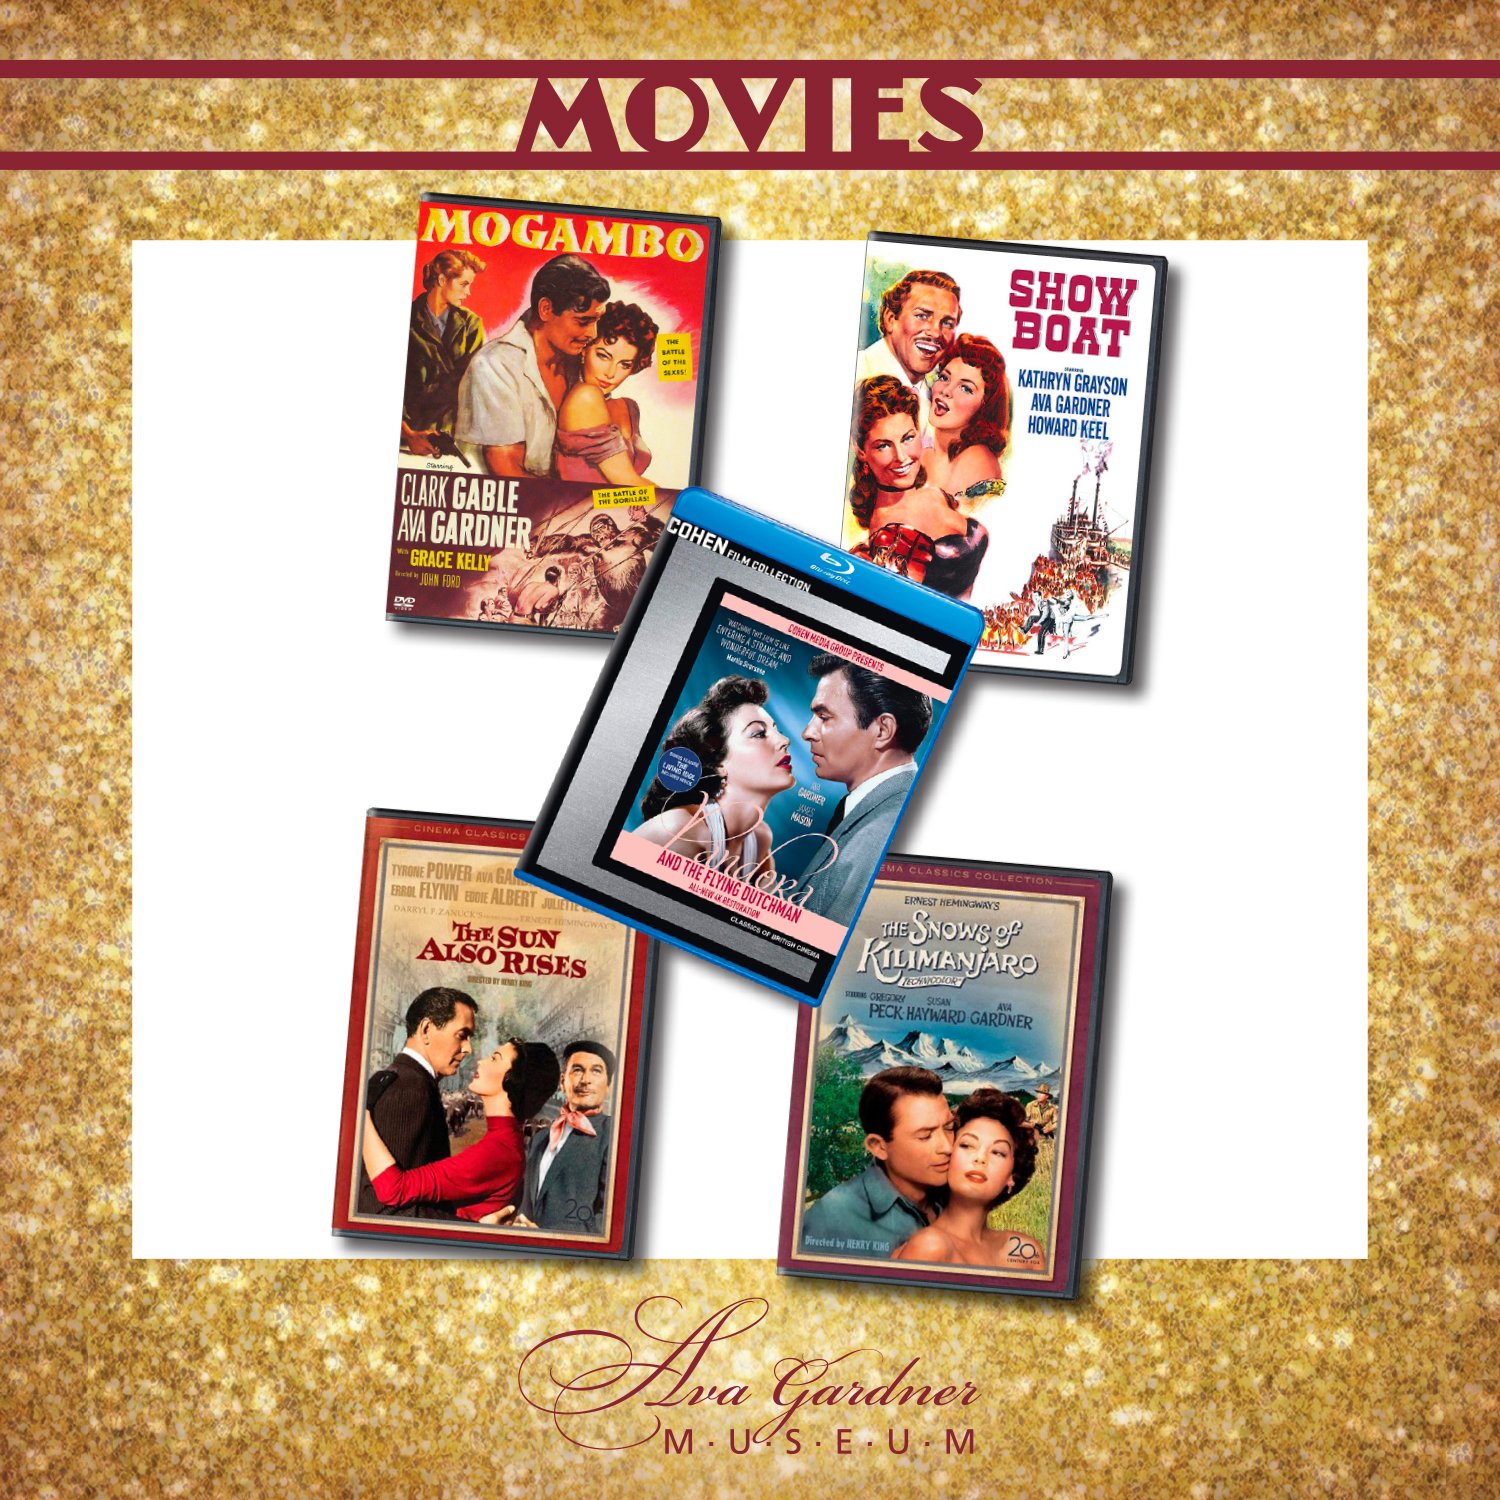 AGM_HolidayGiftGuide_2021_Movies.jpg